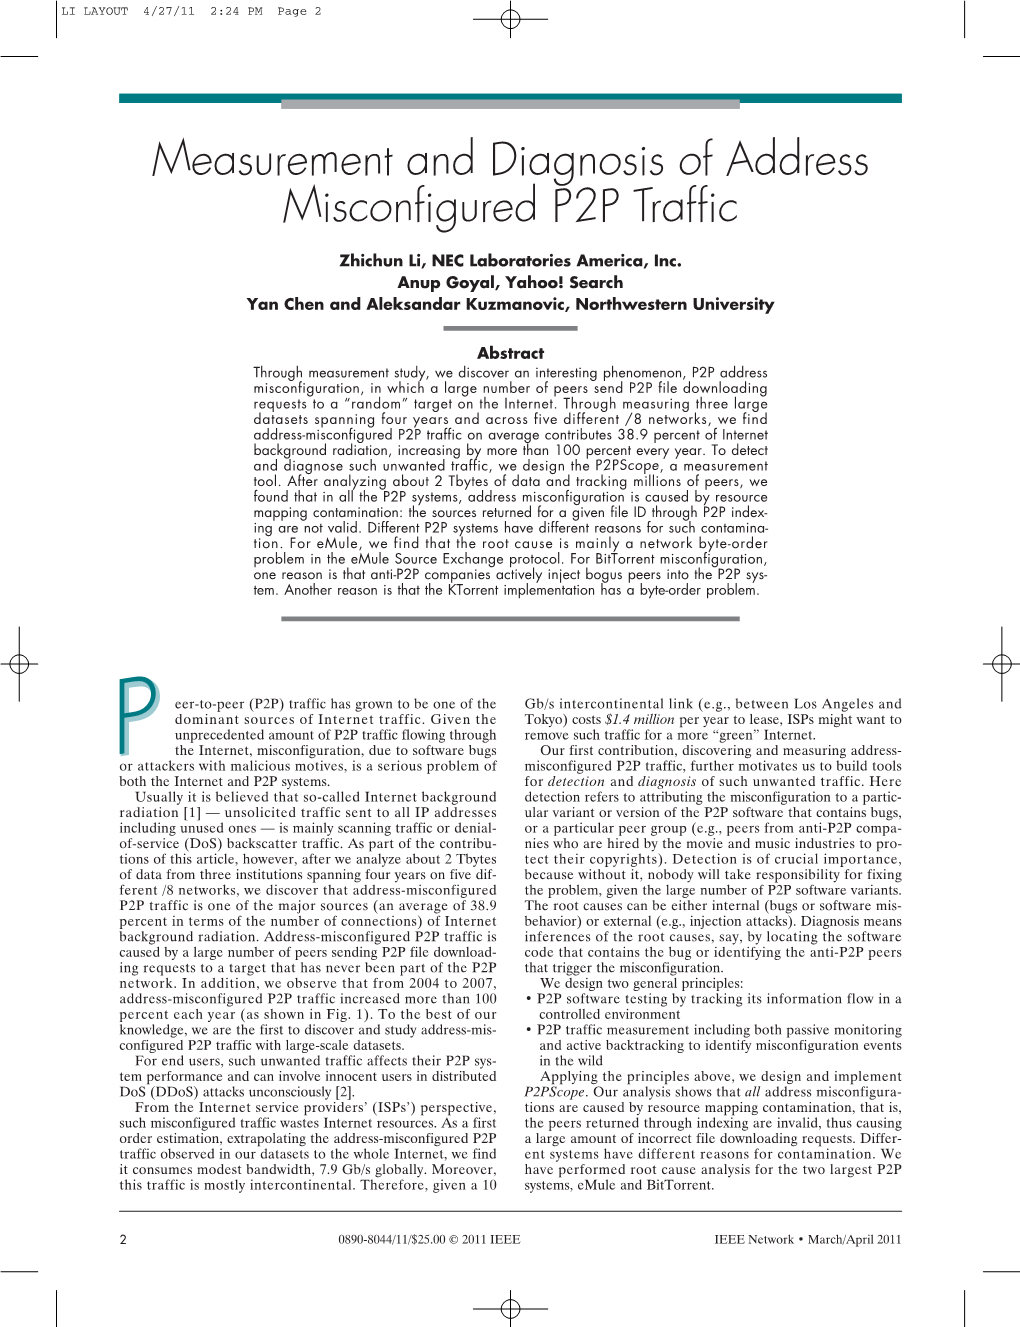 Measurement and Diagnosis of Address Misconfigured P2P Traffic